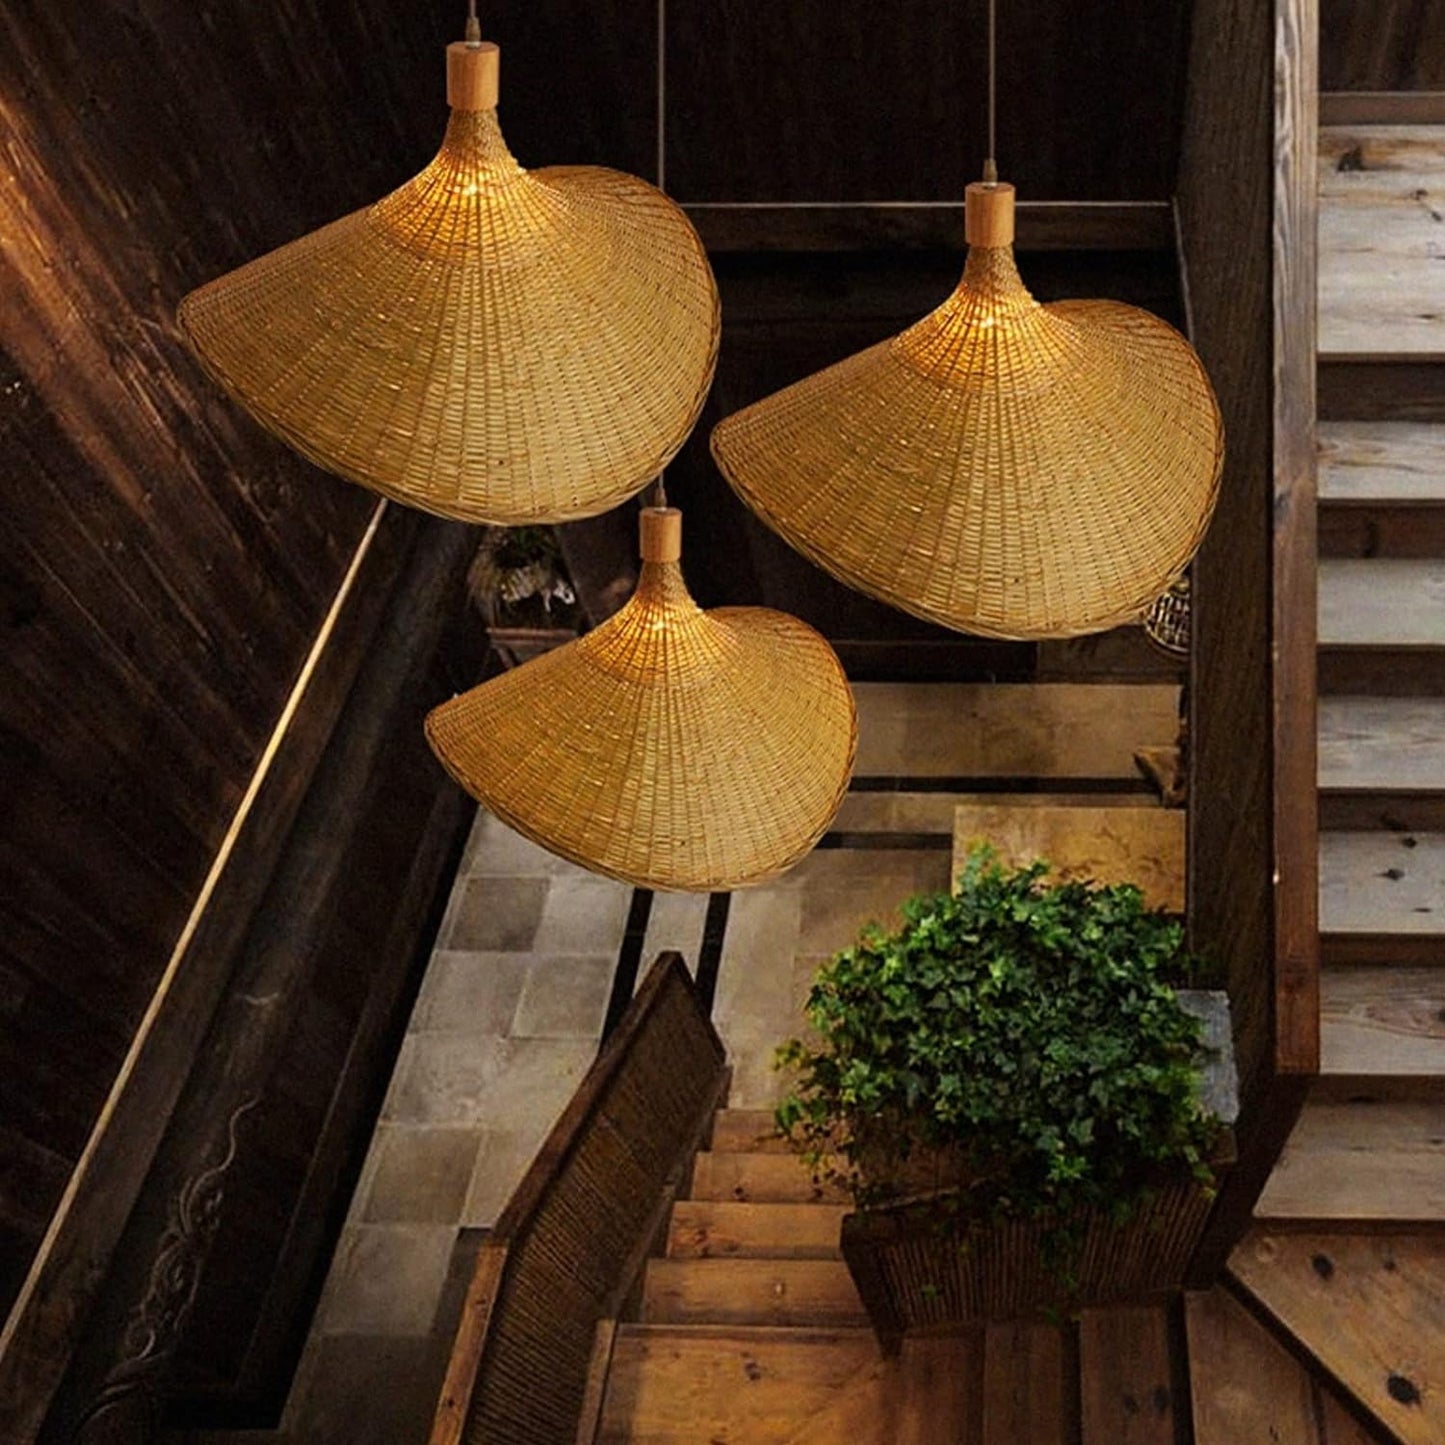 JKTOLKY Bamboo Pendant Lighting Fixtures, Art Bird Nest Lamp Shade hat Ceiling Hanging Light with Adjustable Cord for Living Room Dining Room Bar